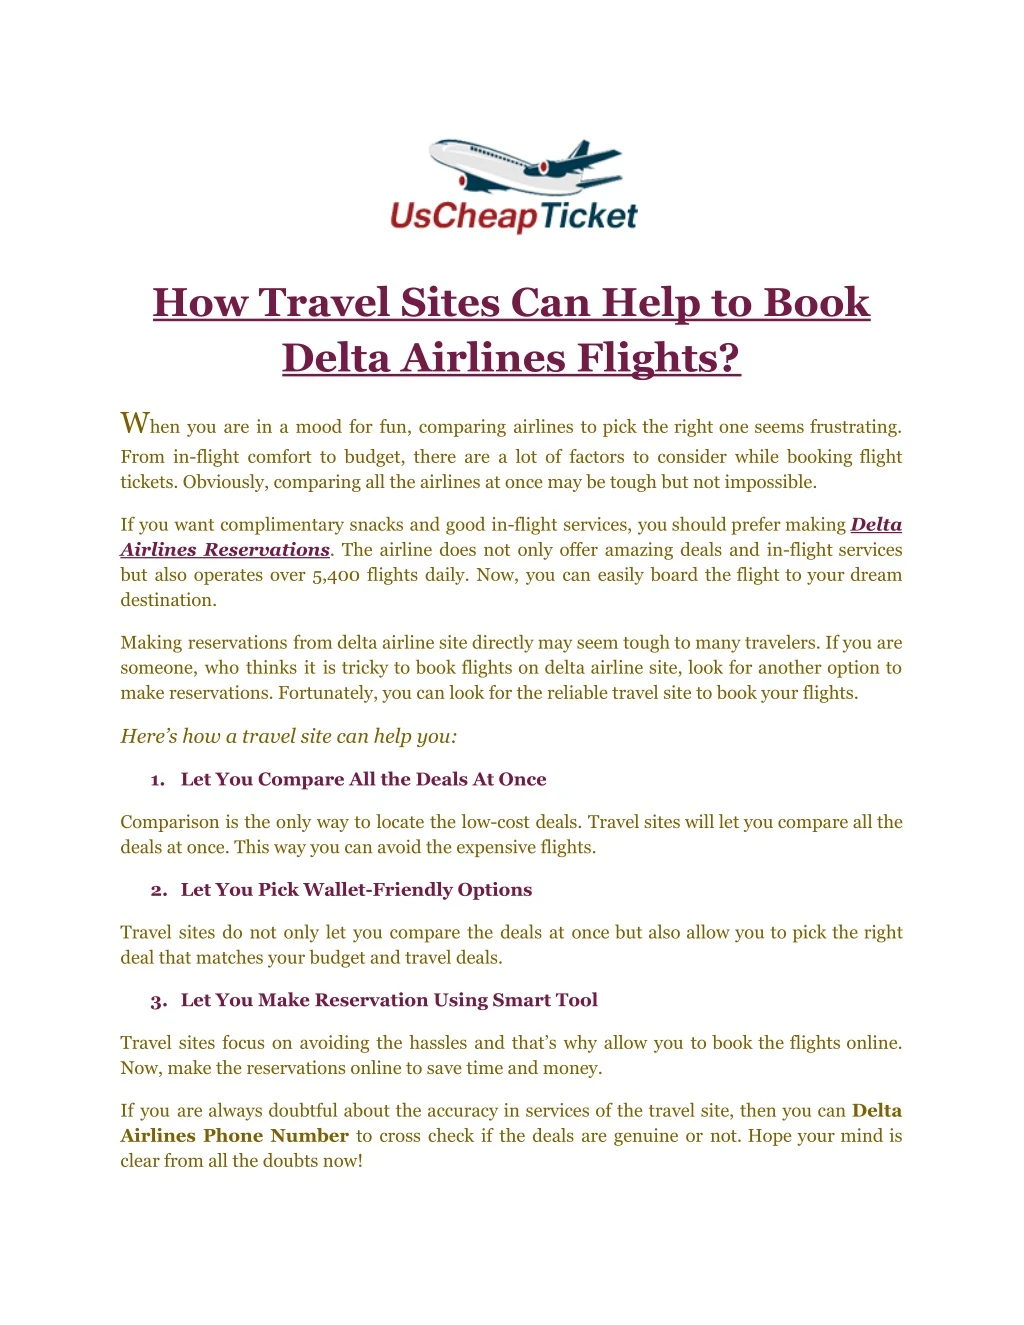 how travel sites can help to book delta airlines